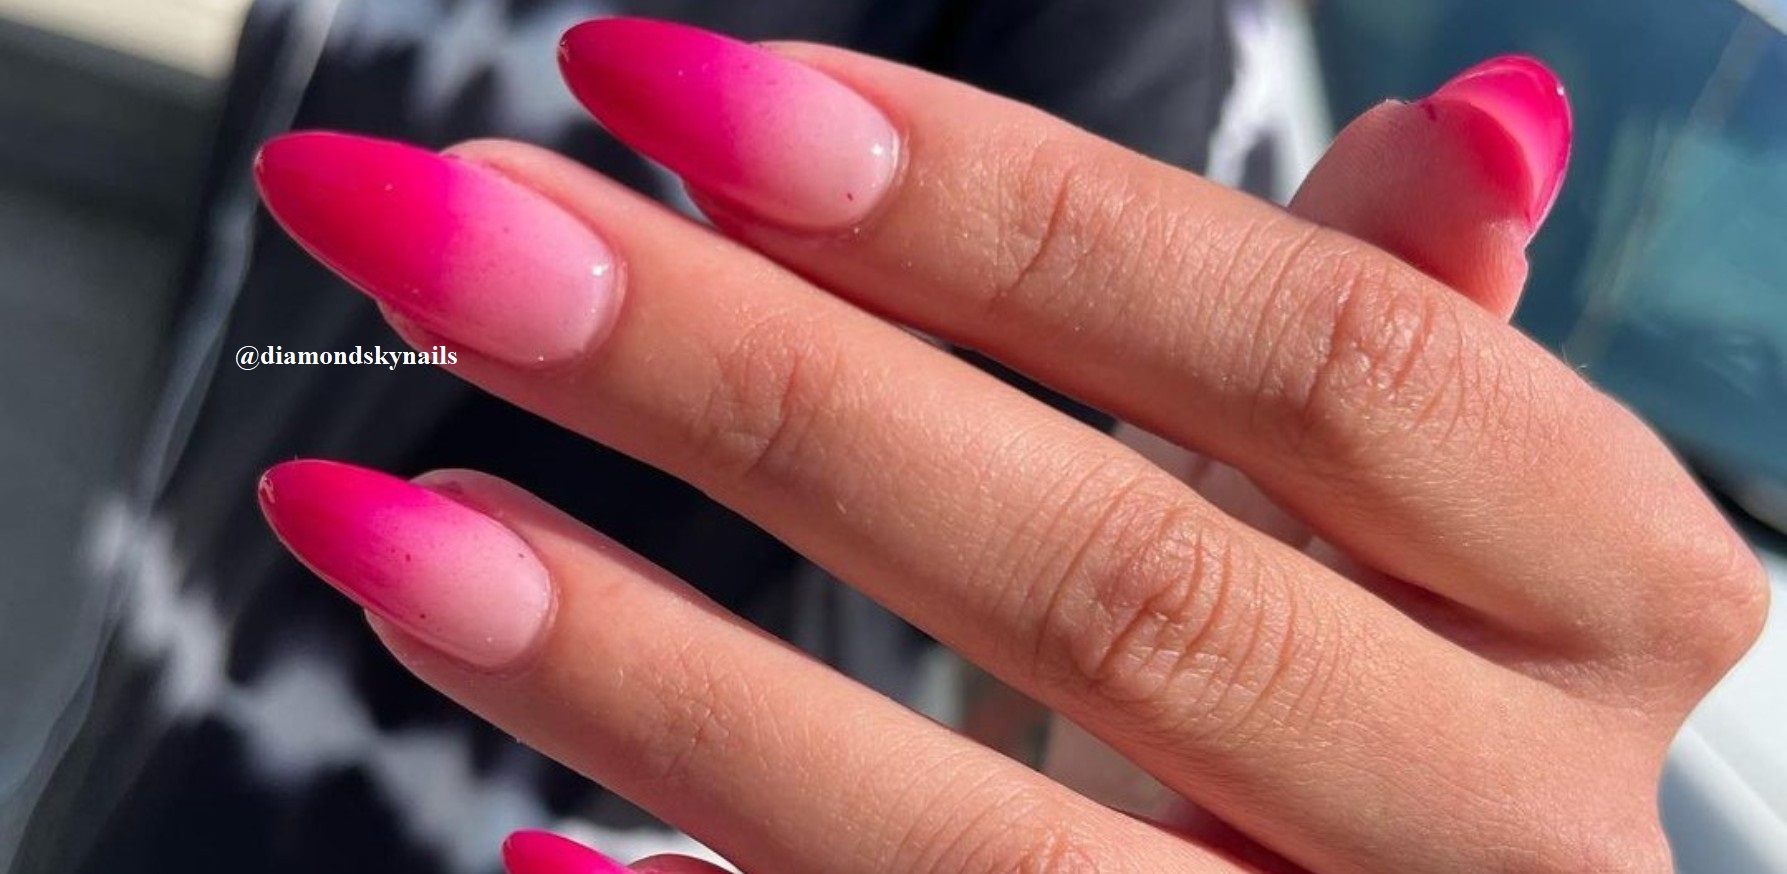 Hot Pink Nails Are The Talk Of The Town RN